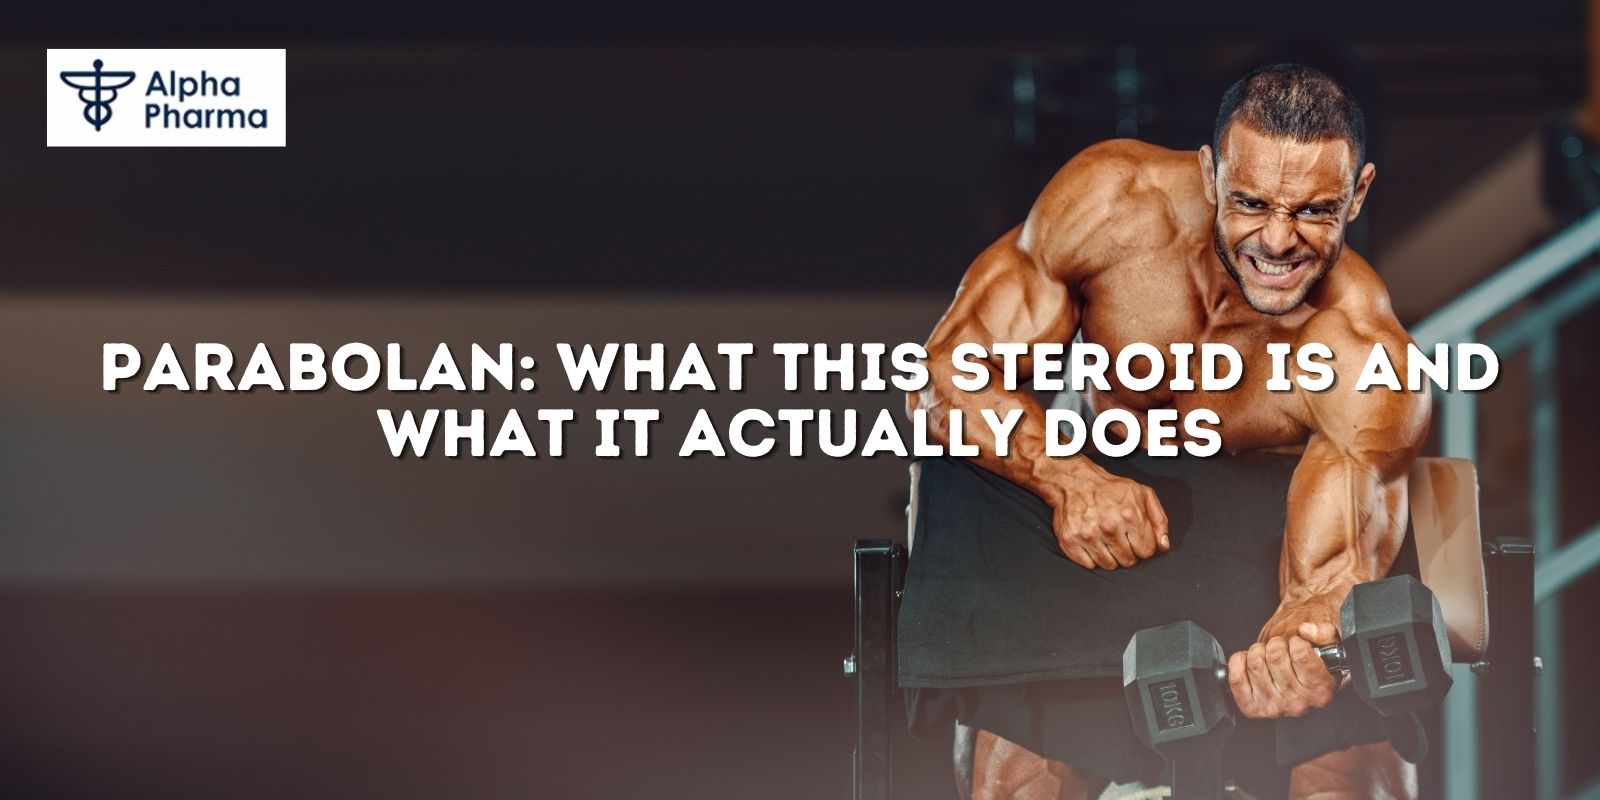 Parabolan: What This Steroid Is and What It Actually Does